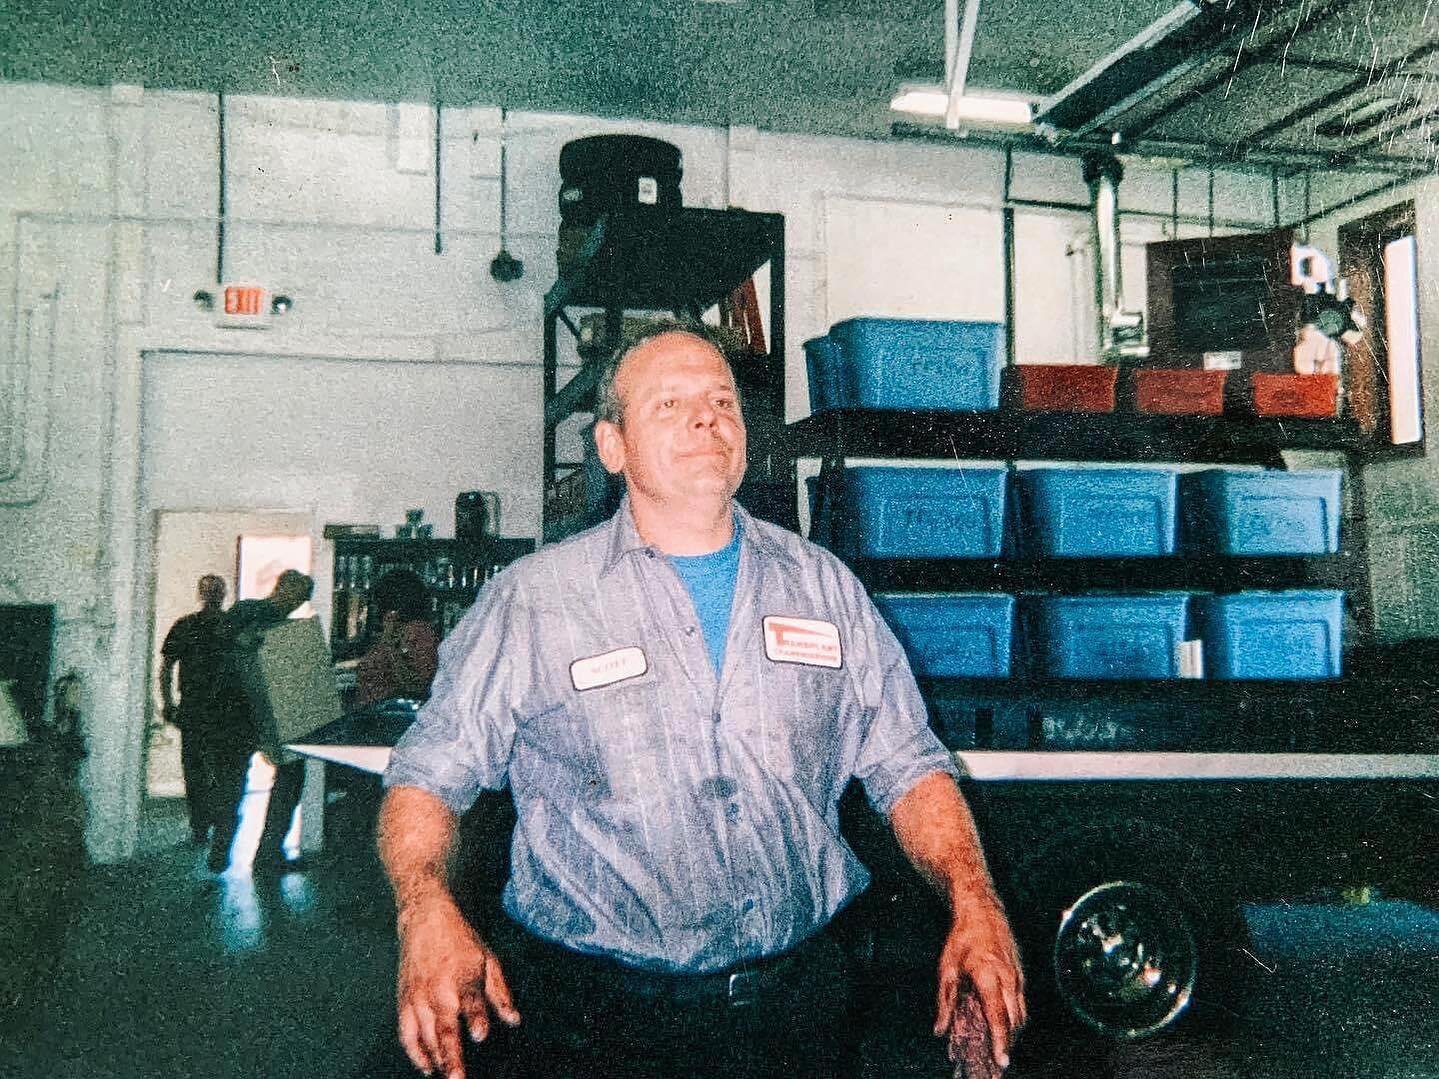 Our founder Scott Dittbrenner the day we moved in to our location at 1040 Boot Rd in Downingtown. He passed away just a few short years later. 

He worked hard to keep the shop clean (a very difficult task in the automotive repair world) and over the